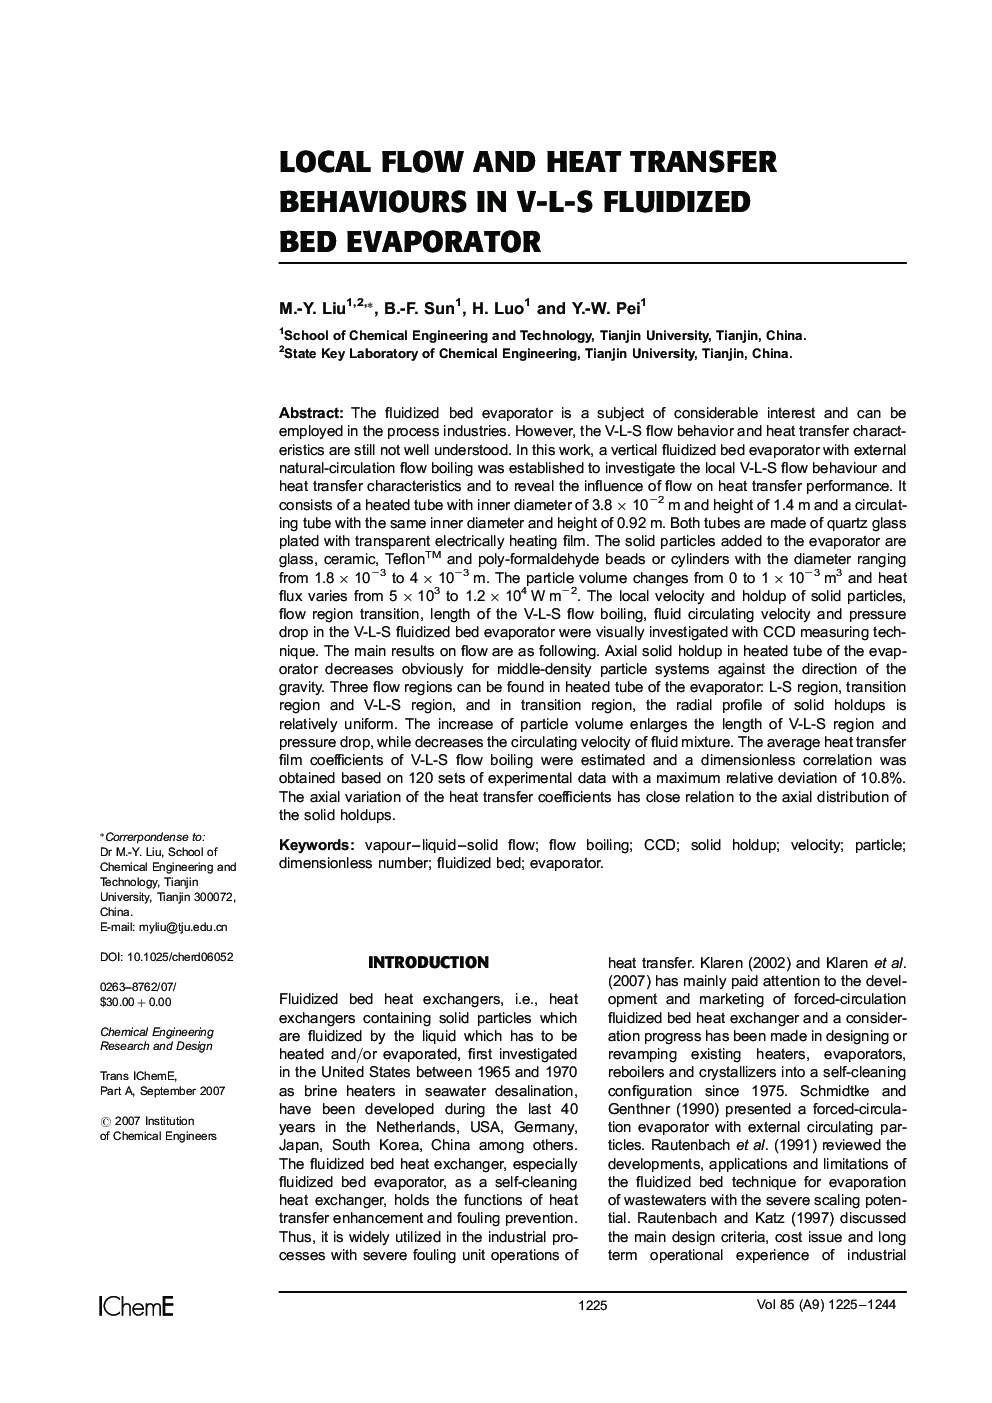 Local Flow and Heat Transfer Behaviours in V-L-S Fluidized Bed Evaporator